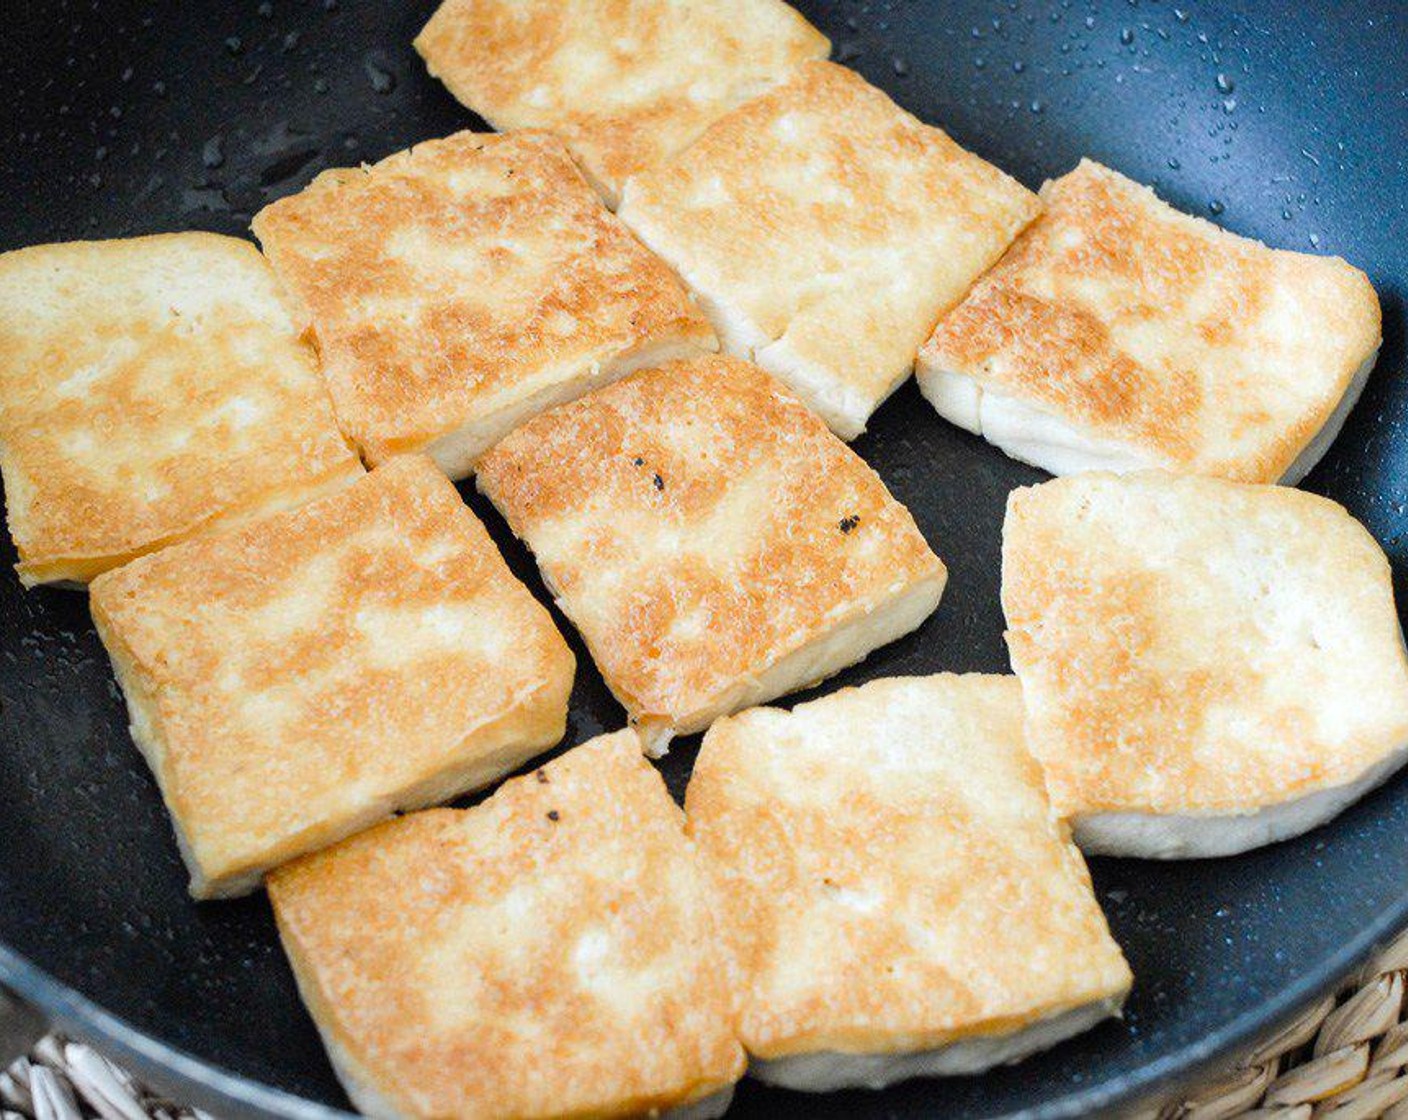 step 2 Add oil of choice in hot pan, then add in tofu, cook under medium heat until both sides are golden. (Each side take about 5-7 minutes)